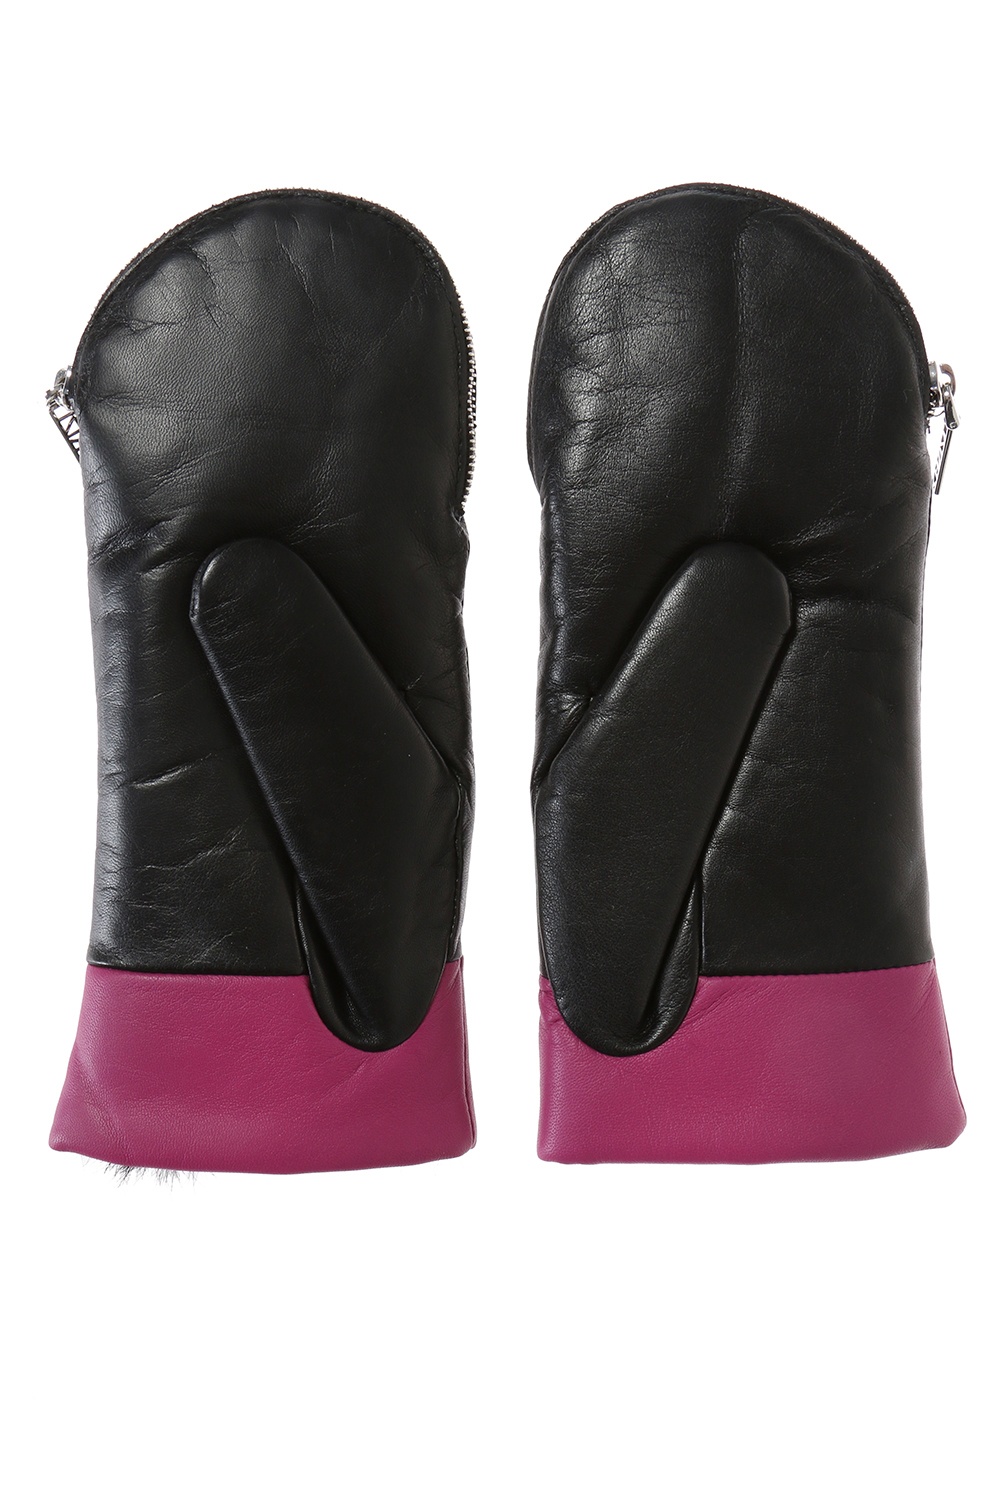 kenzo leather gloves